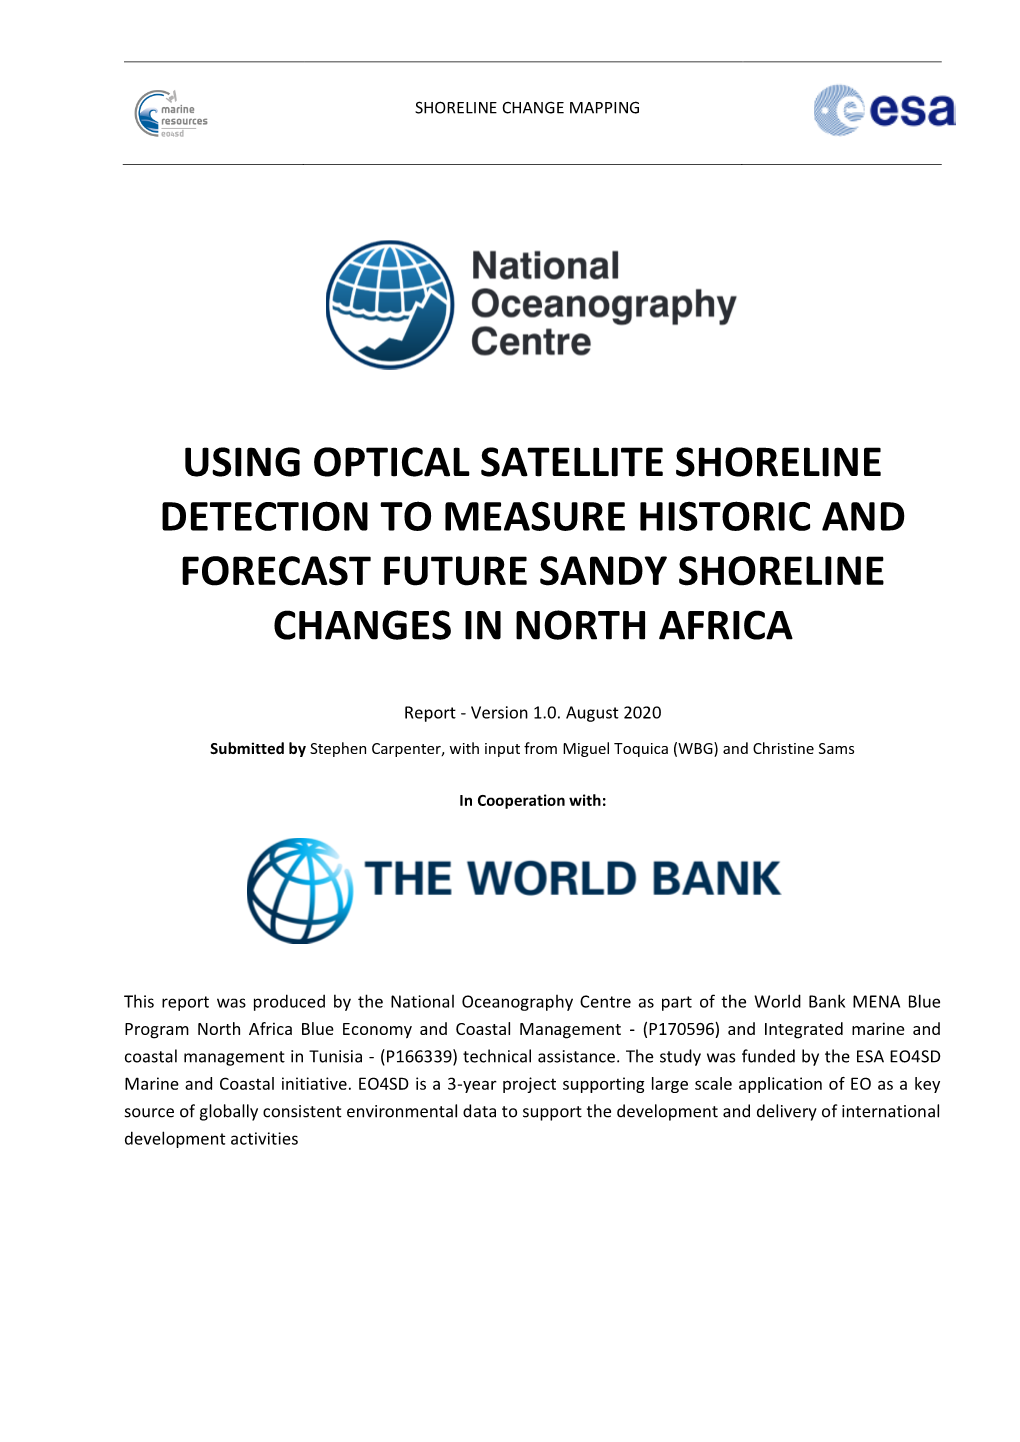 Using Optical Satellite Shoreline Detection to Measure Historic and Forecast Future Sandy Shoreline Changes in North Africa